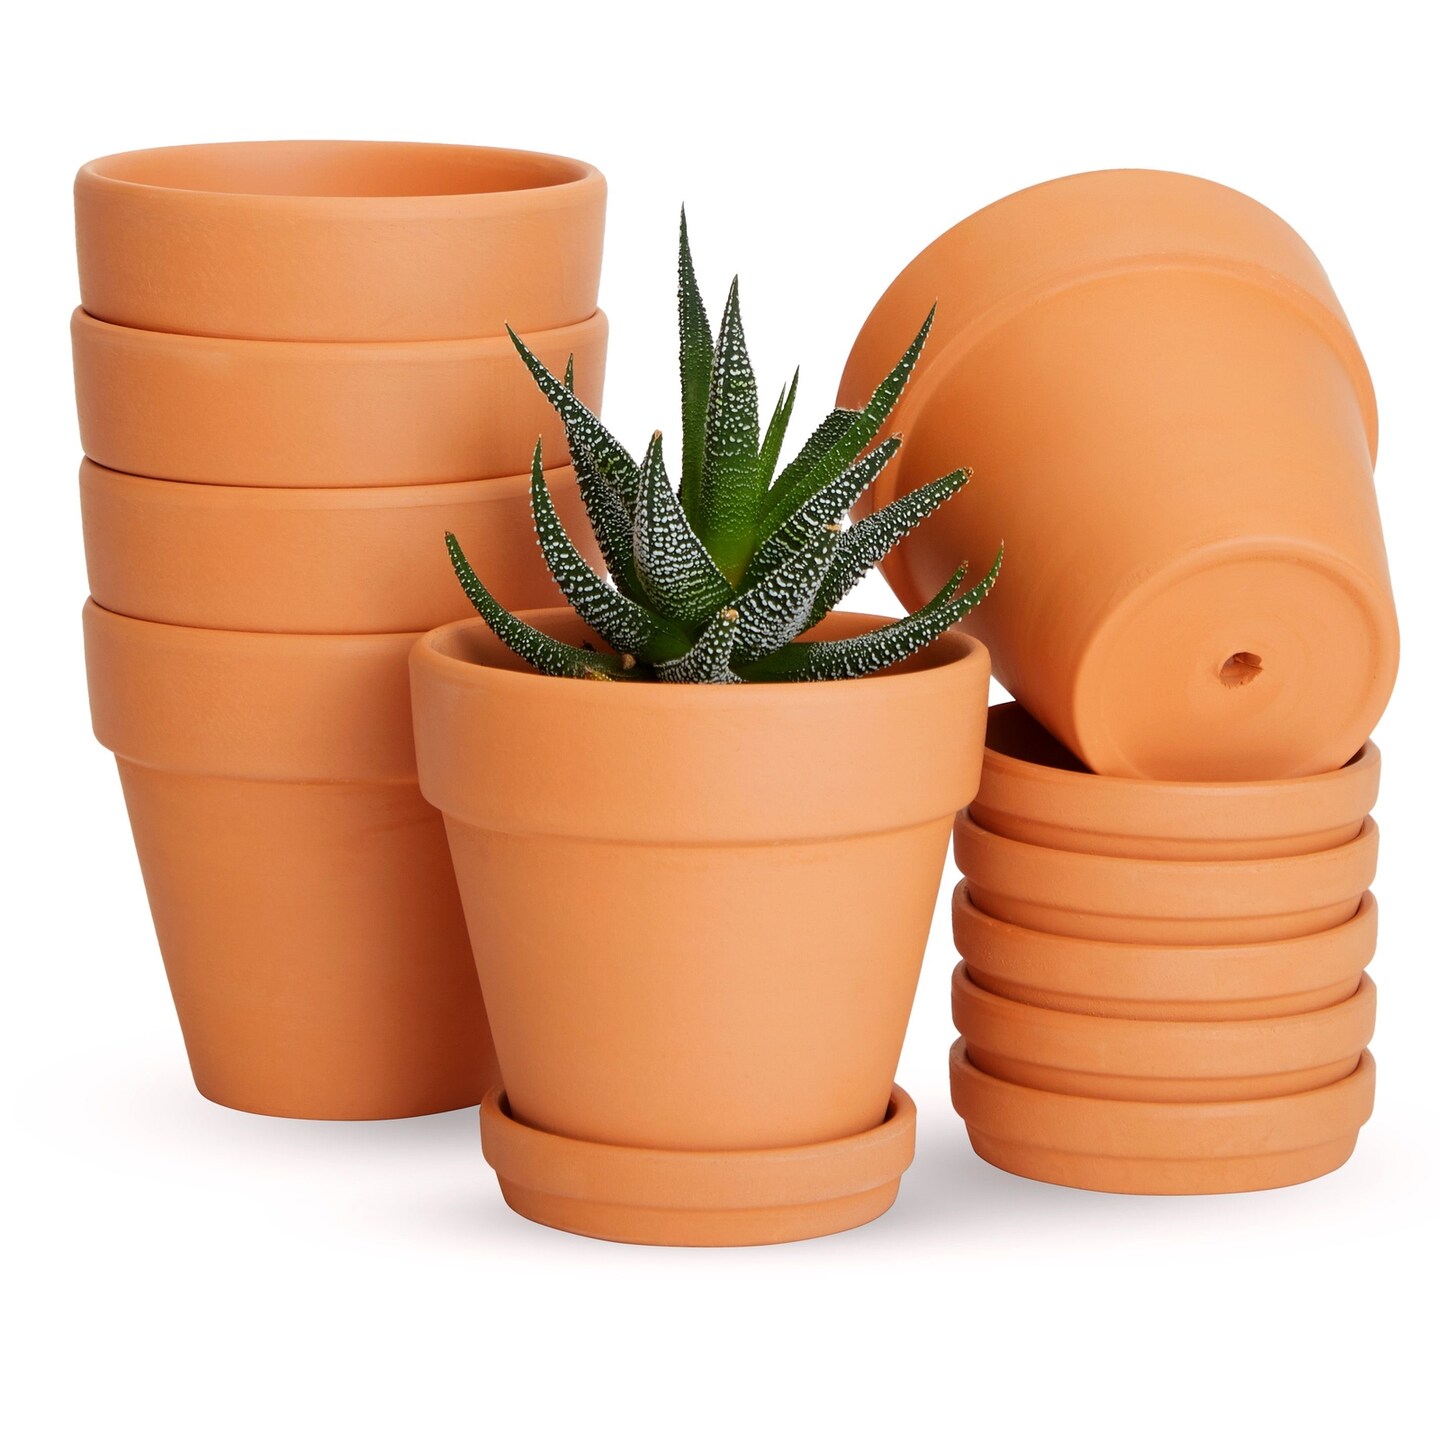 4-inch 6 Pack Small Terracotta Pots with Saucer and Drainage Hole - Clay Planter for Indoor and Outdoor Succulents, Flowers and Plants